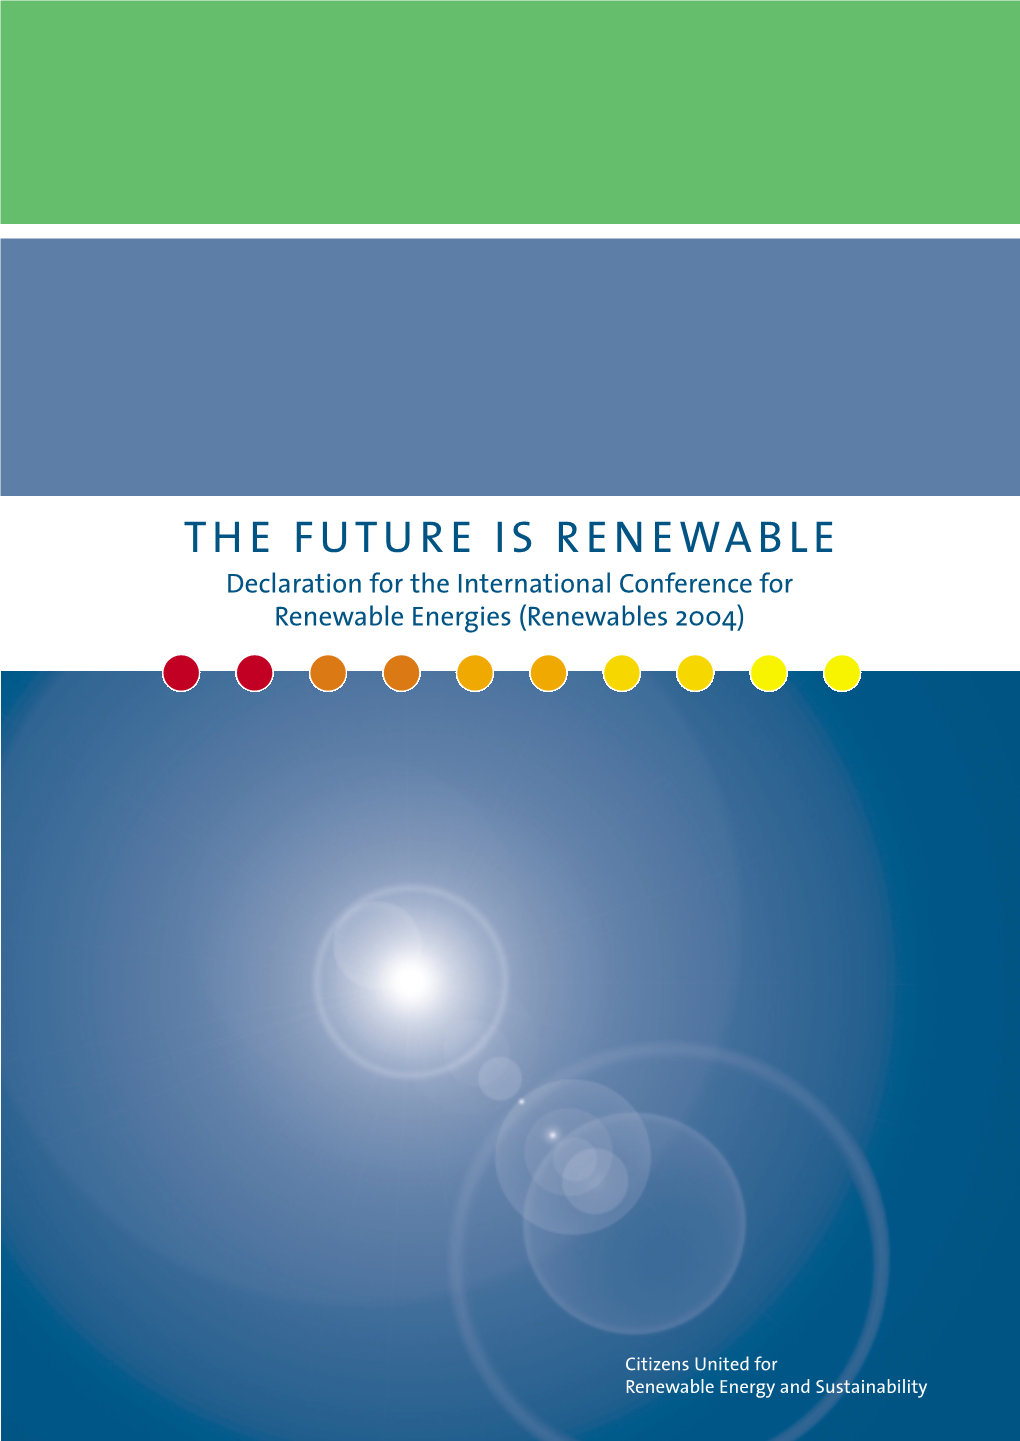 THE FUTURE IS RENEWABLE Declaration for the International Conference for Renewable Energies (Renewables 2004)